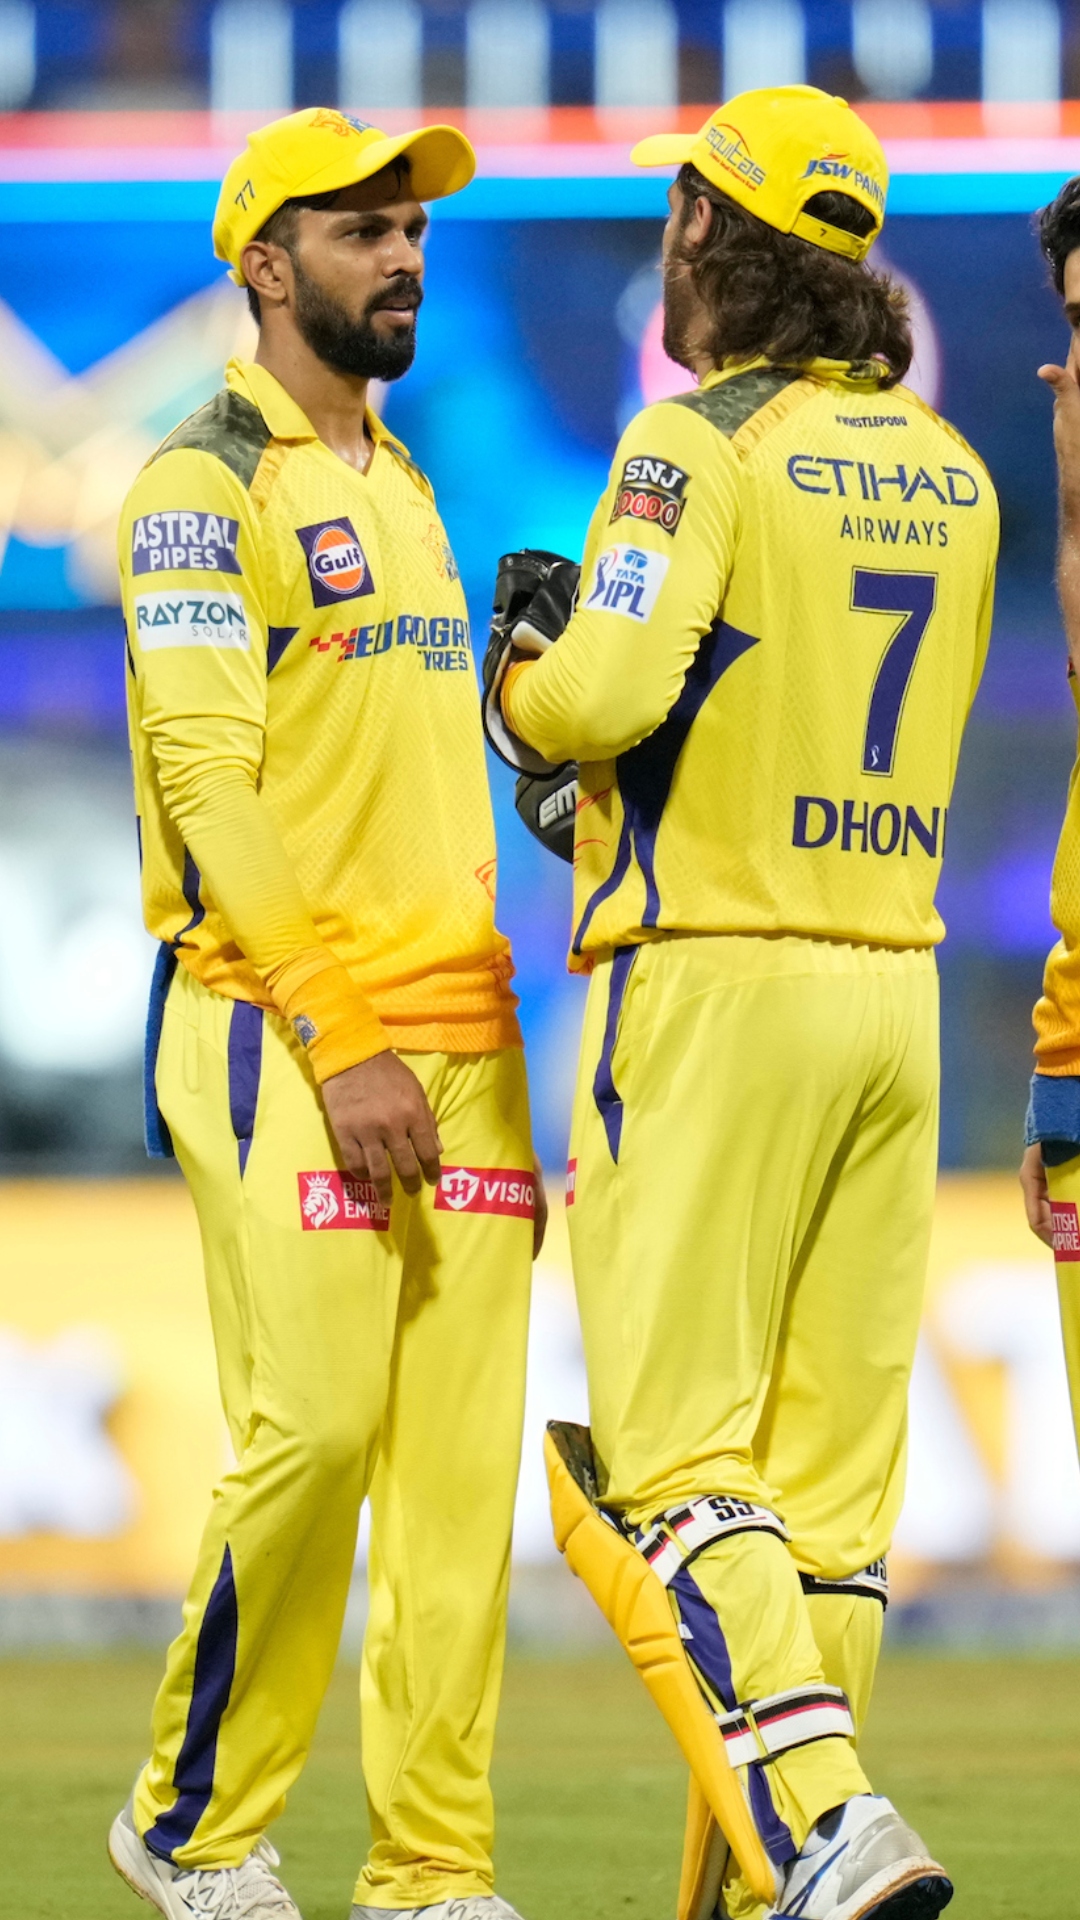 Captains to lose most tosses in an IPL season, Ruturaj Gaikwad equals MS Dhoni's unwanted feat